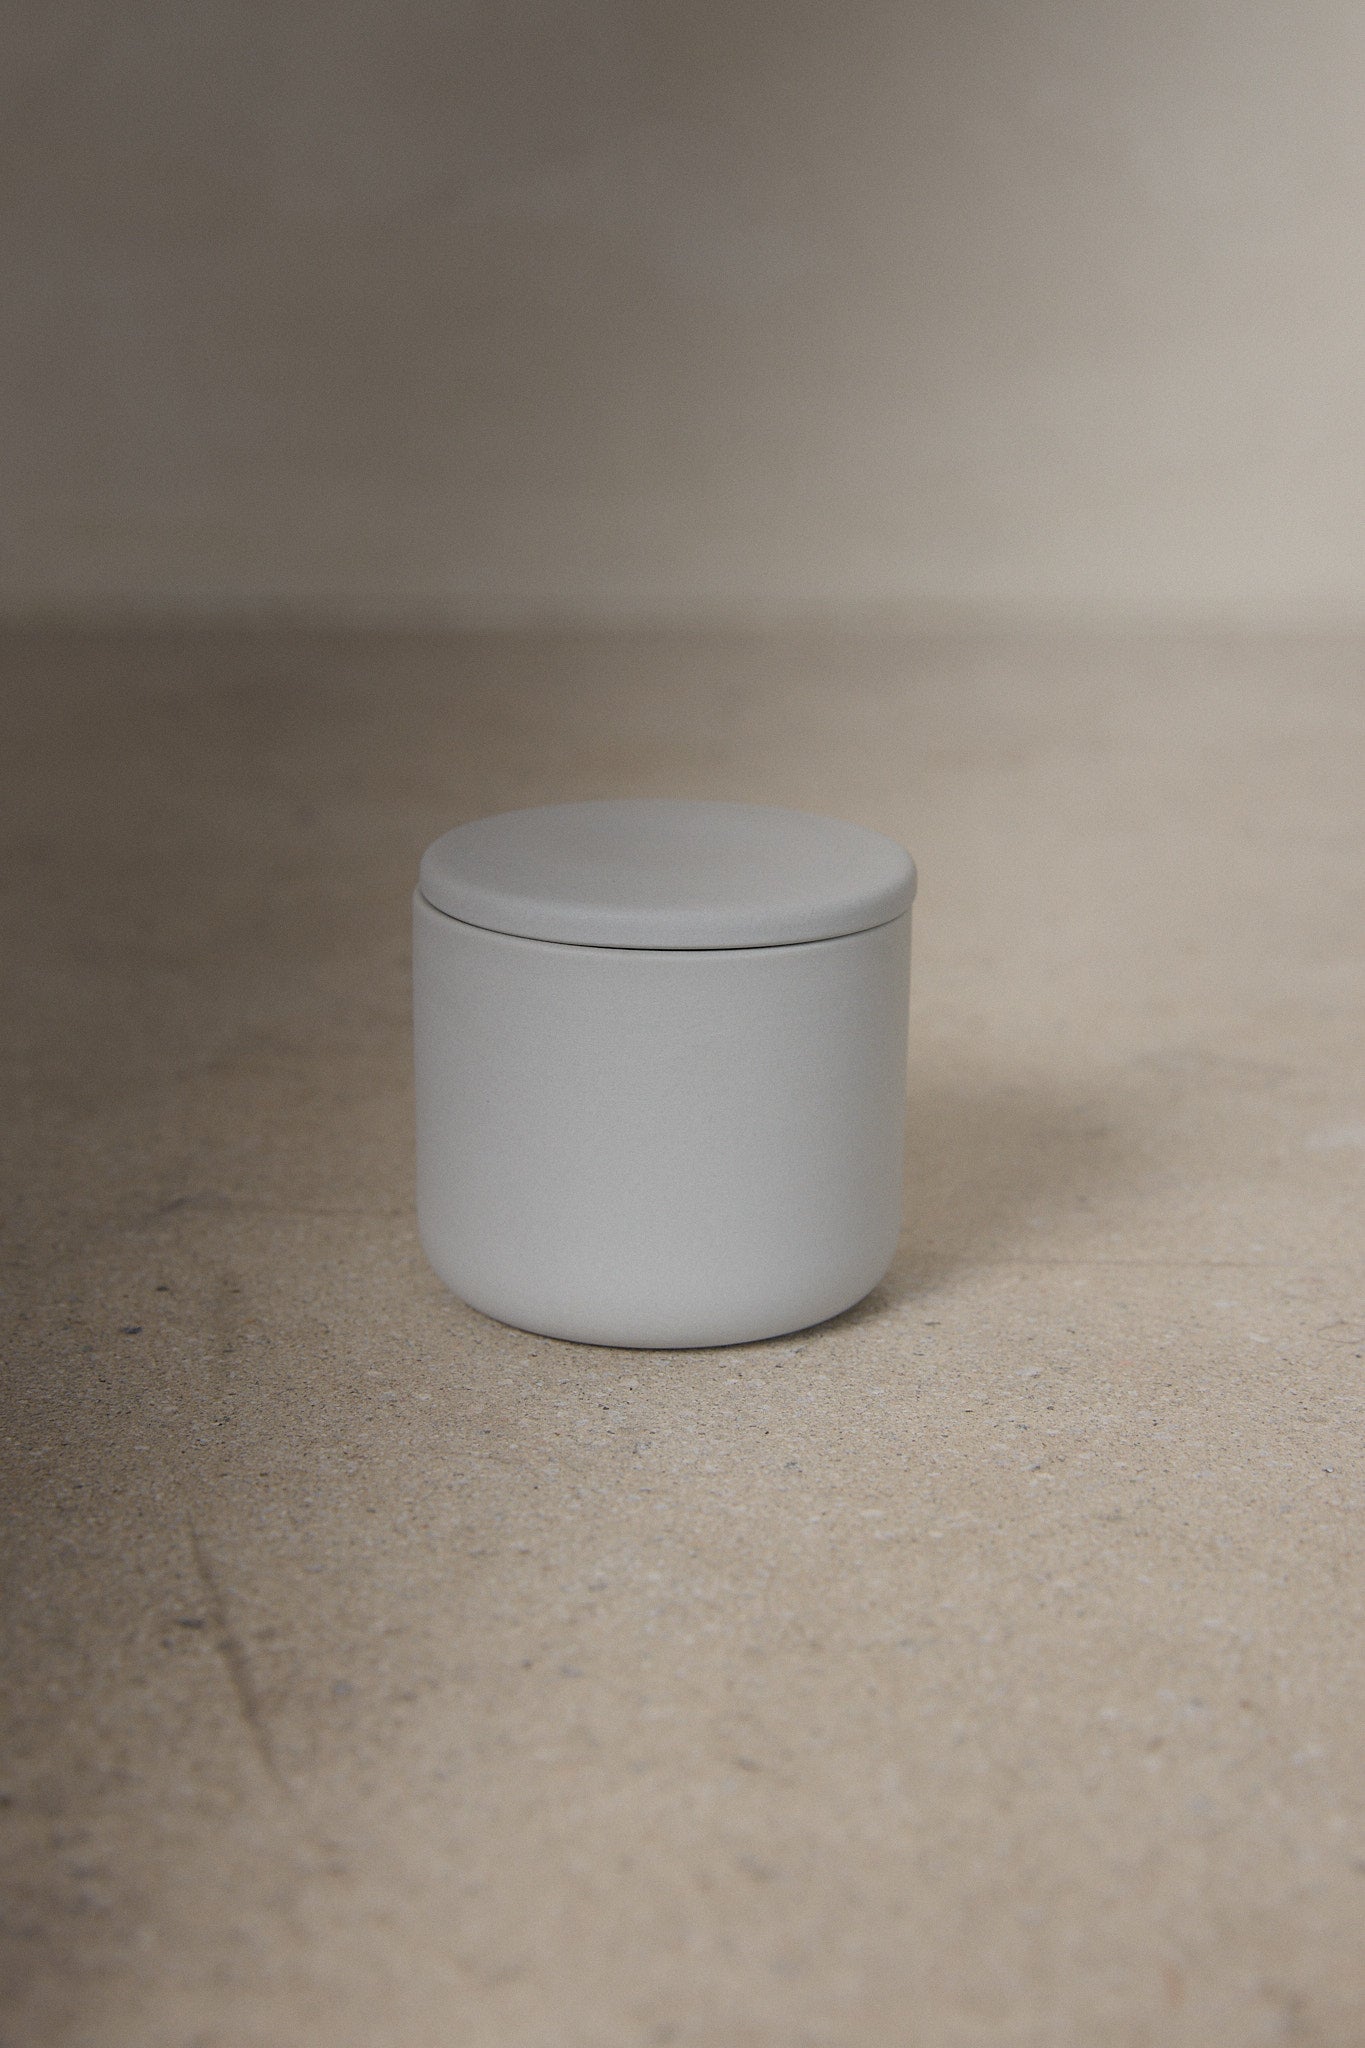 Round Cose Box. A study in refined simplicity, the Round Cose Box by Bertrand Lejoly for Serax adds subtle luxury to any bathroom or kitchen. 